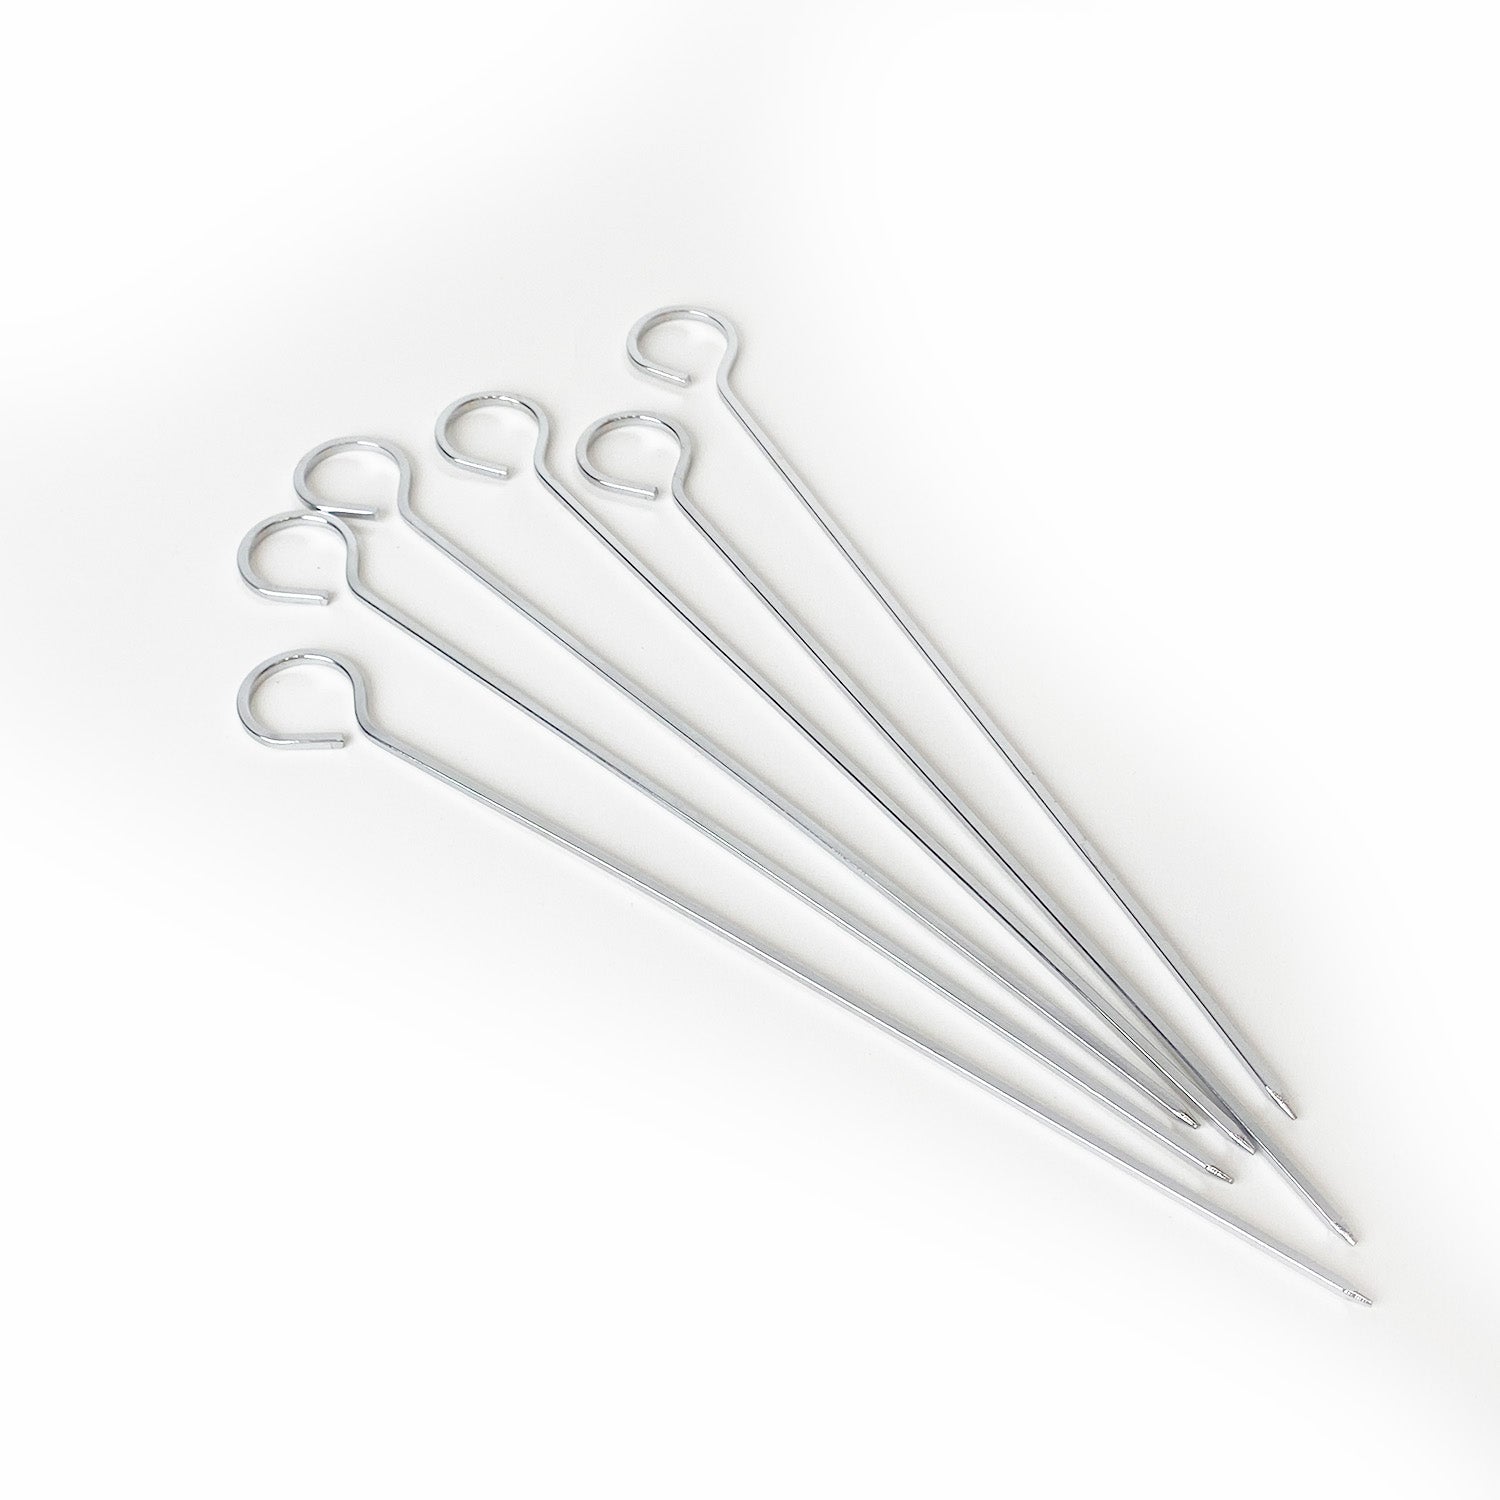 Chrome 9" BBQ Skewers (Pack of 6)